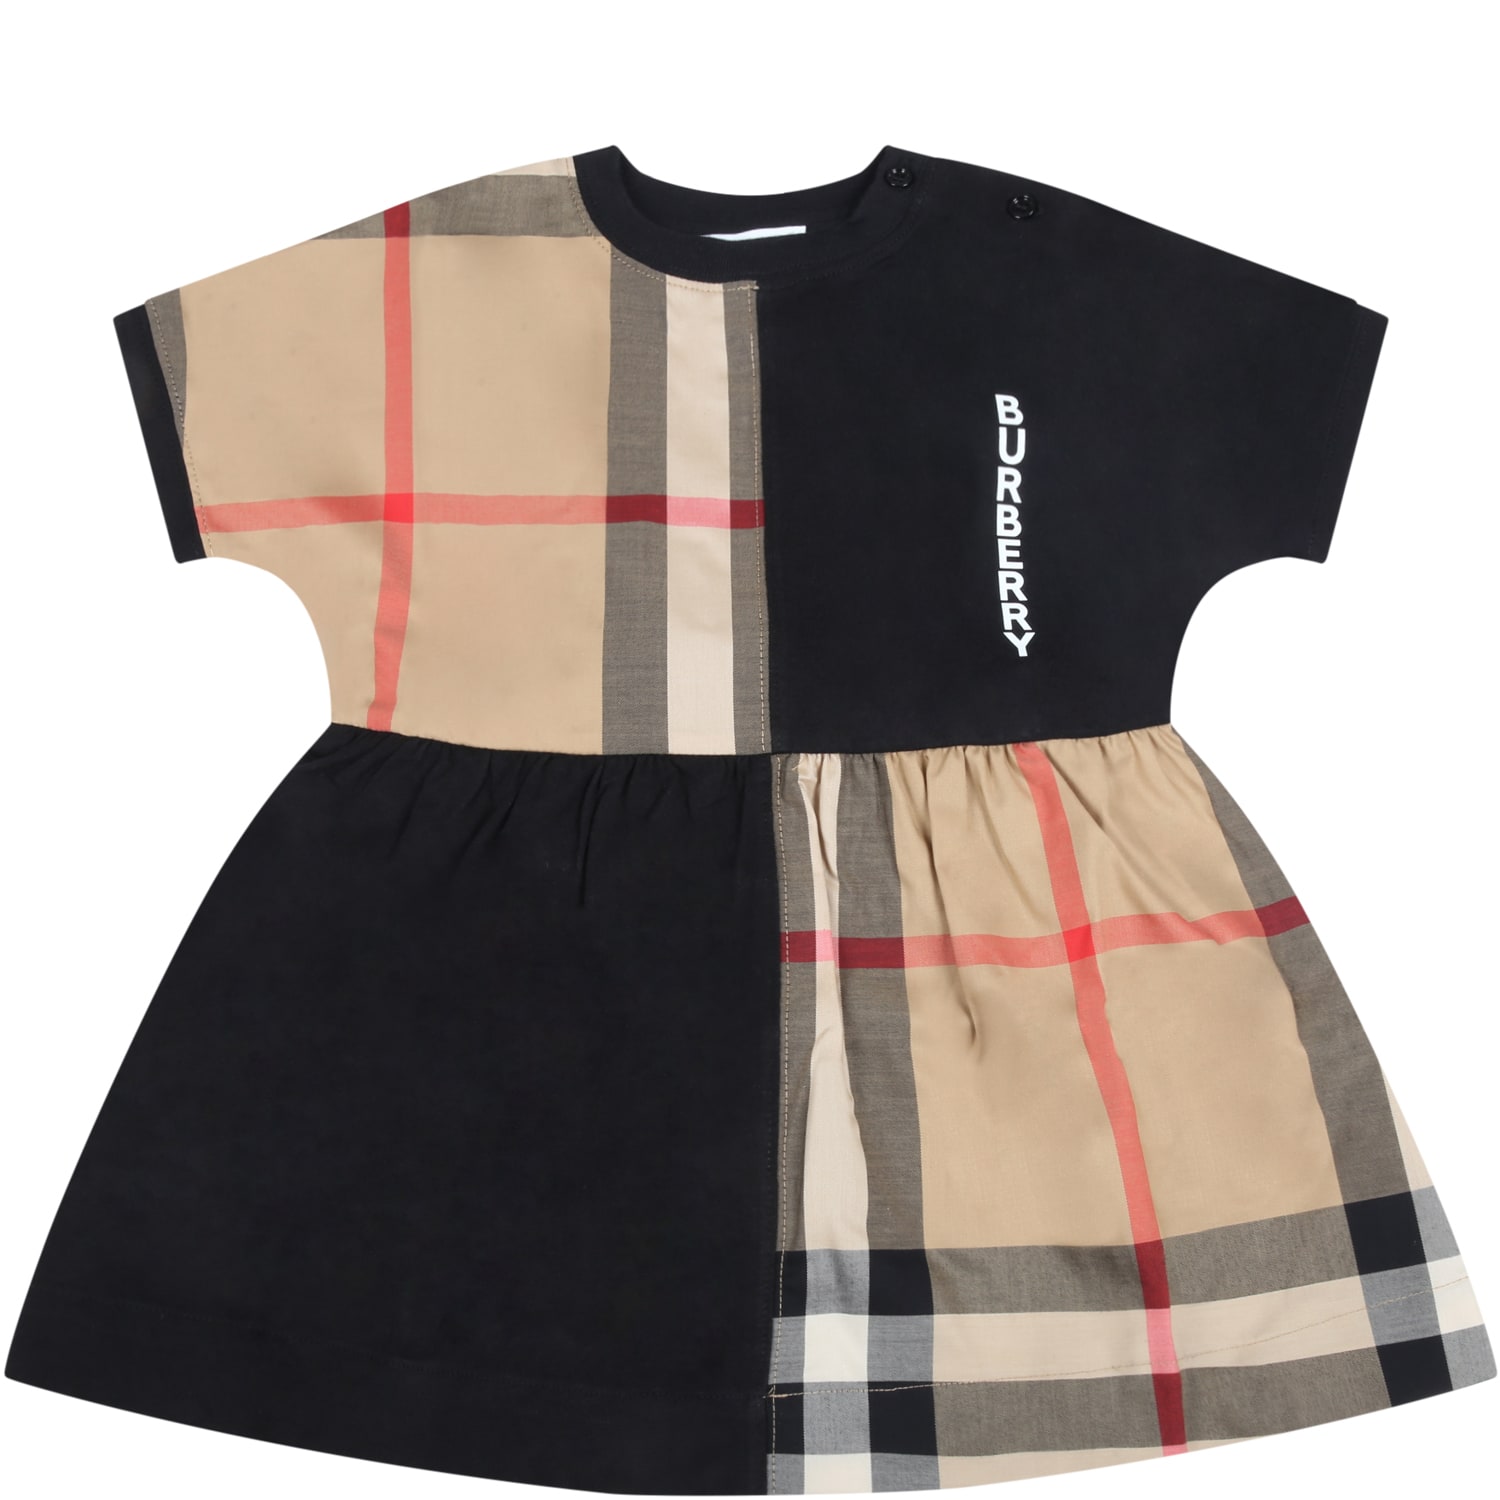 Burberry Black Dress For Baby Girl With Logo